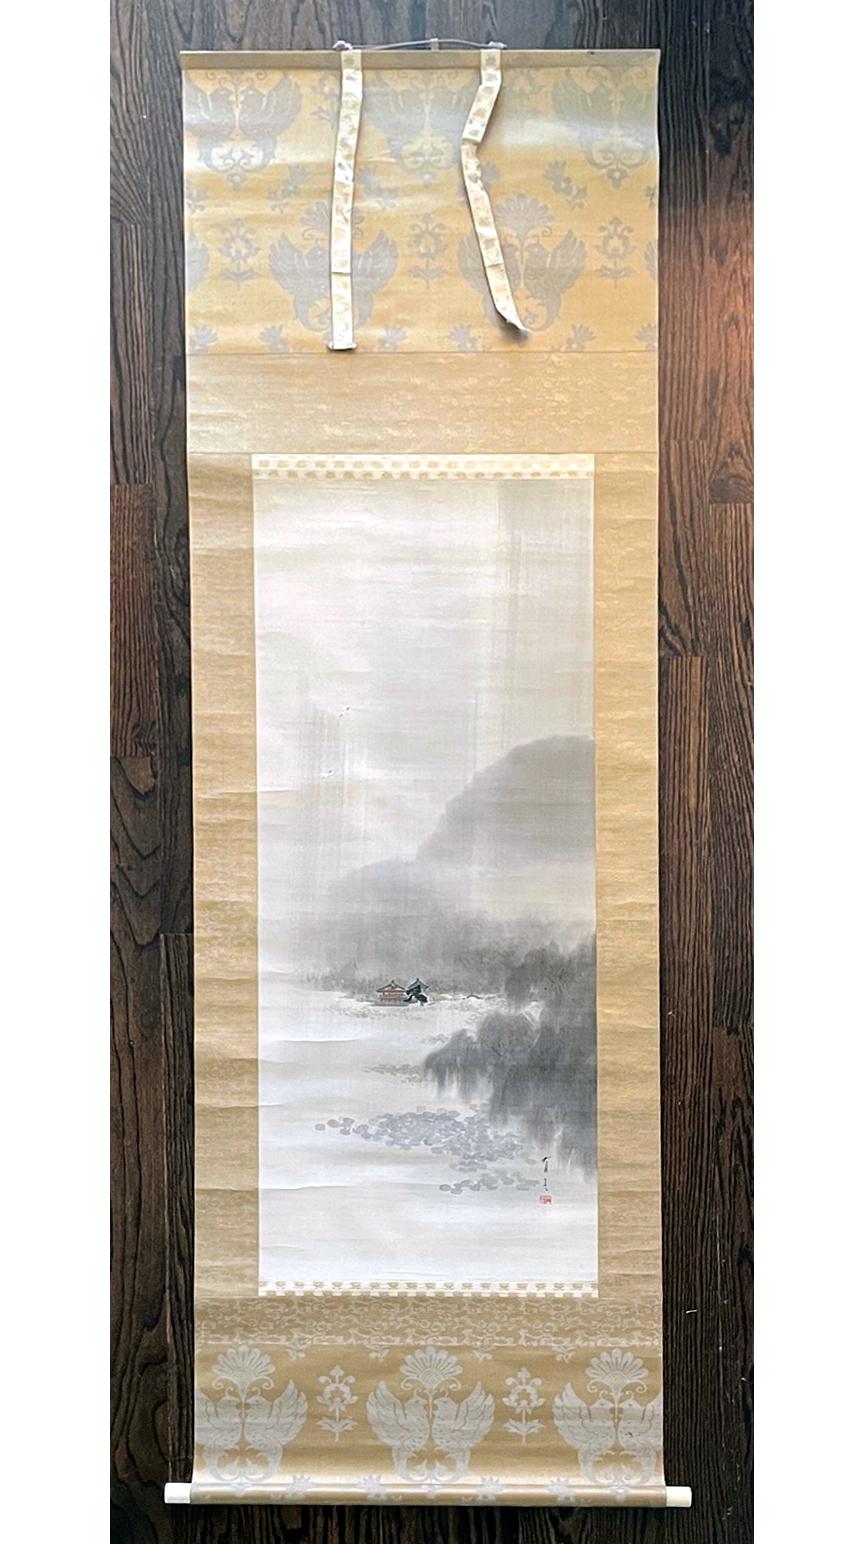 A set of three paintings of ink and watercolor on silk mounted within brocade borders as scrolls by Watanabe Seitei (1851-1918). This is a very rare and well preserved triptych by the artist, signed and dated to the year of 1902, Meiji 35th year.